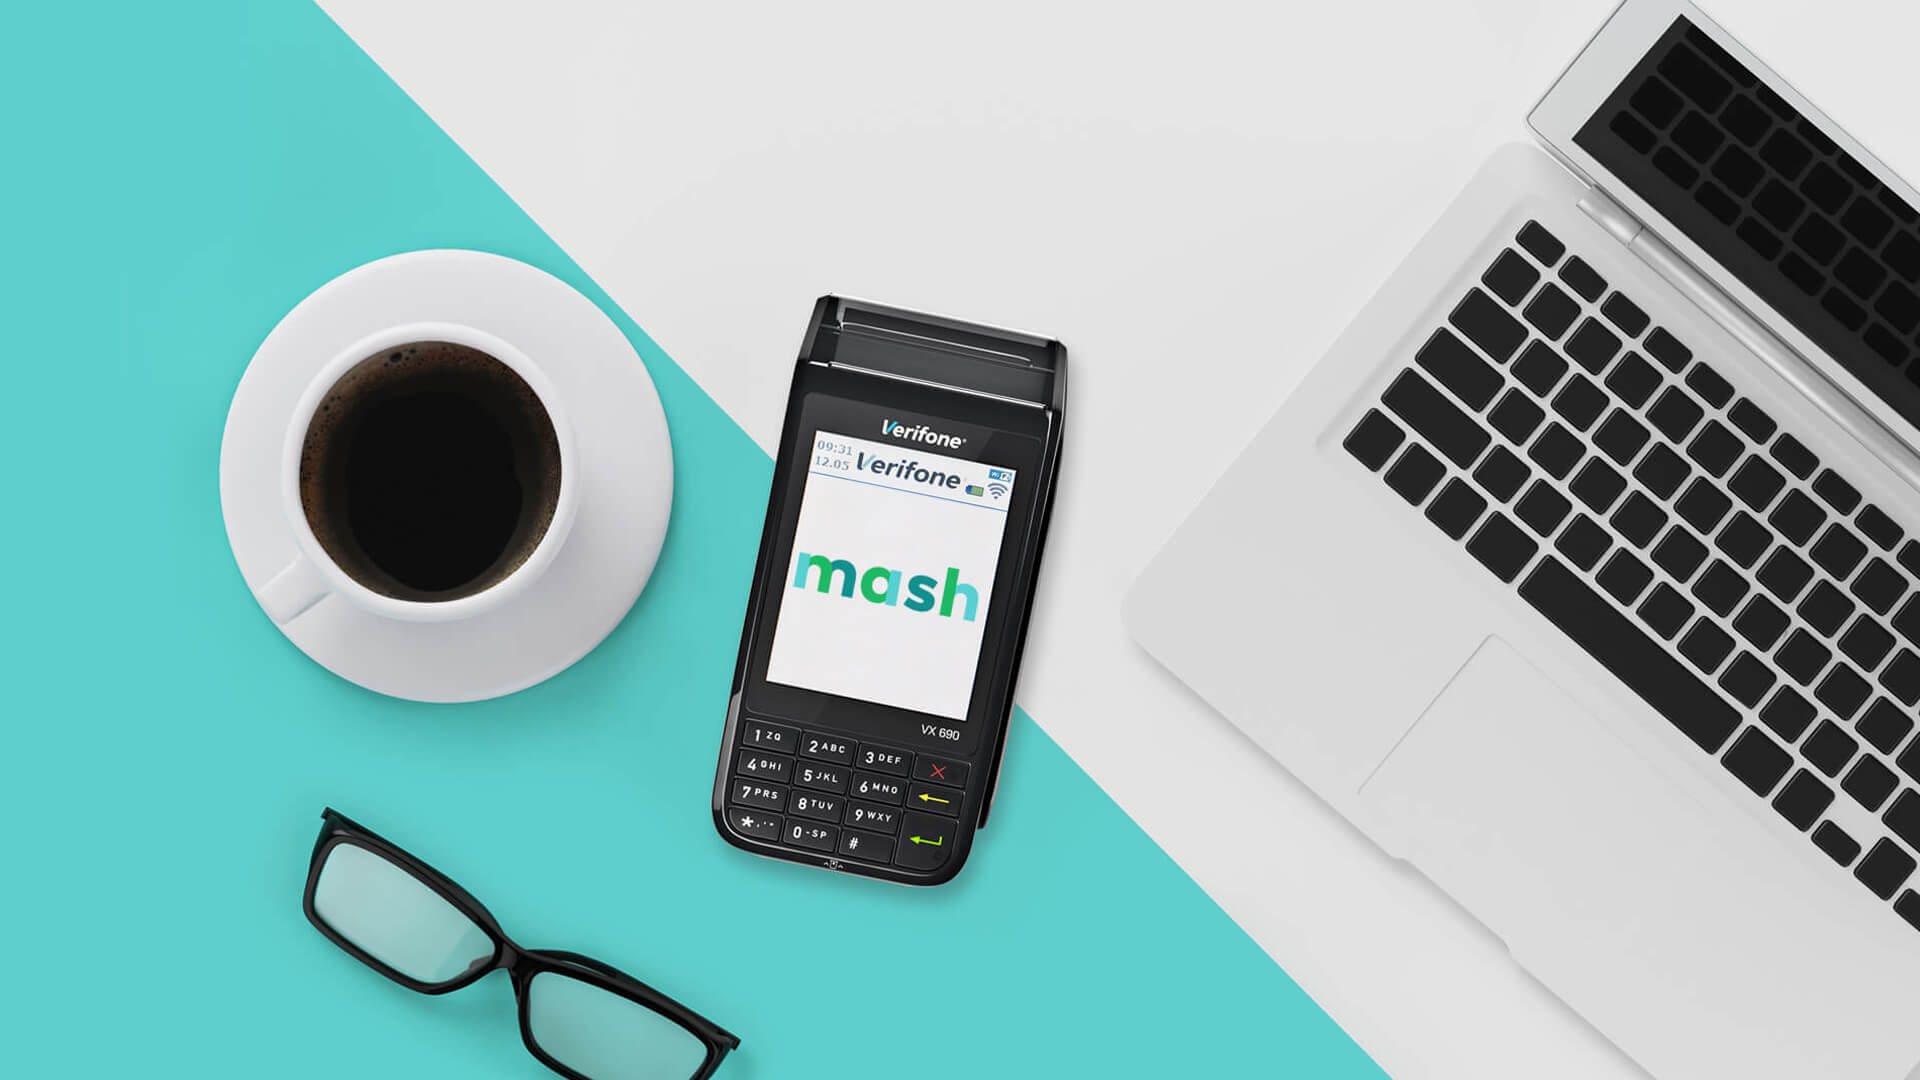 AI Global Media announces  Mash as the Most Outstanding Online Payment Service Provider 2018